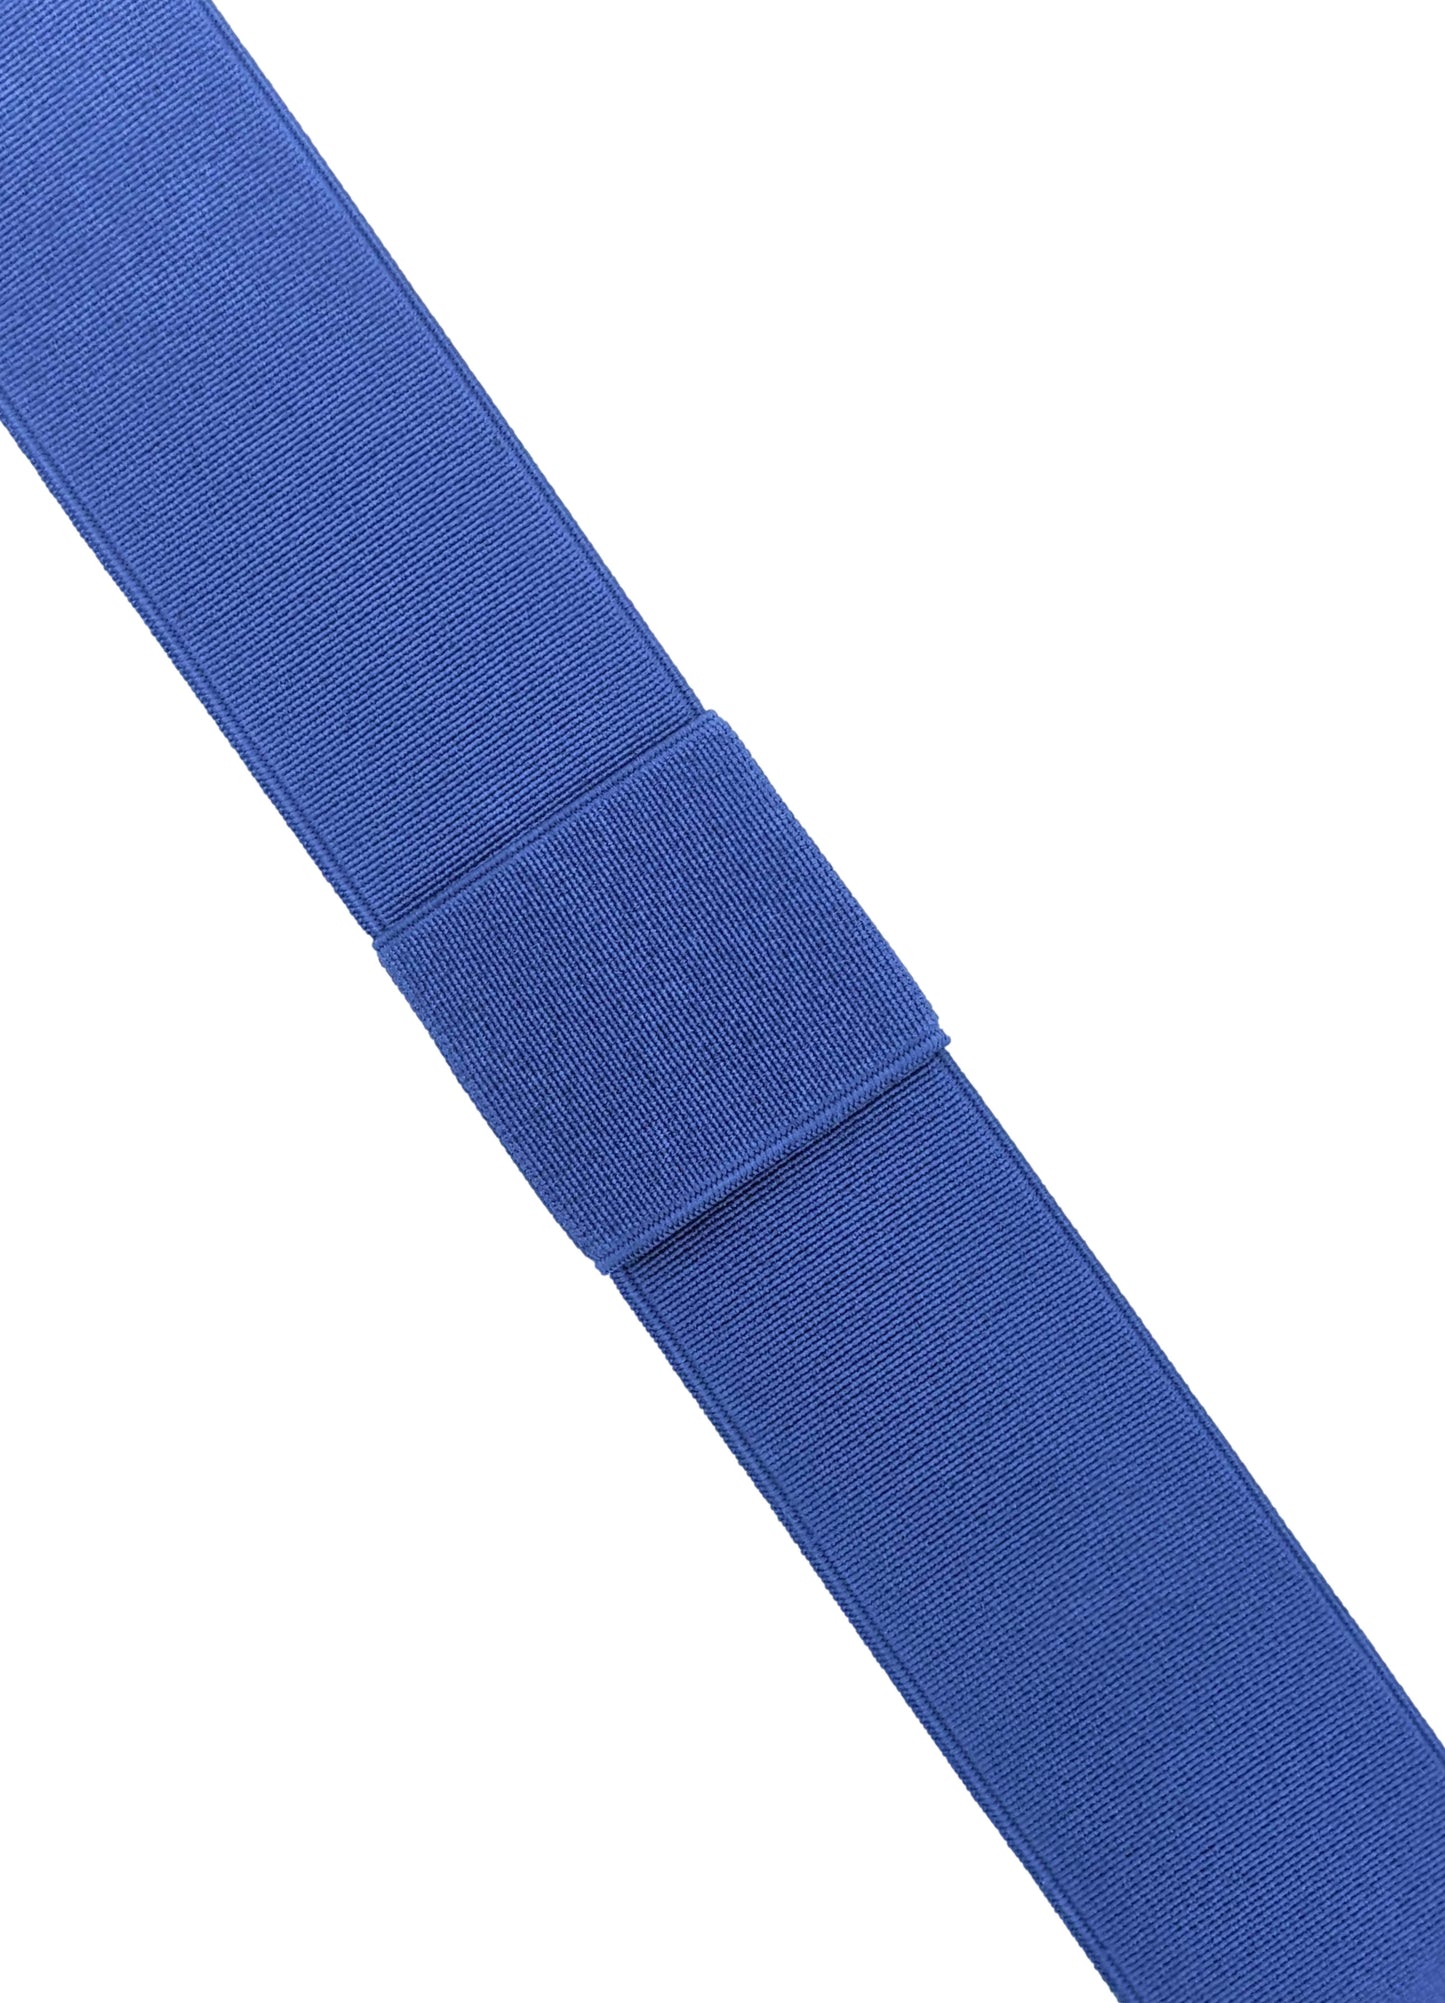 White Panama with Cobalt Blue Band